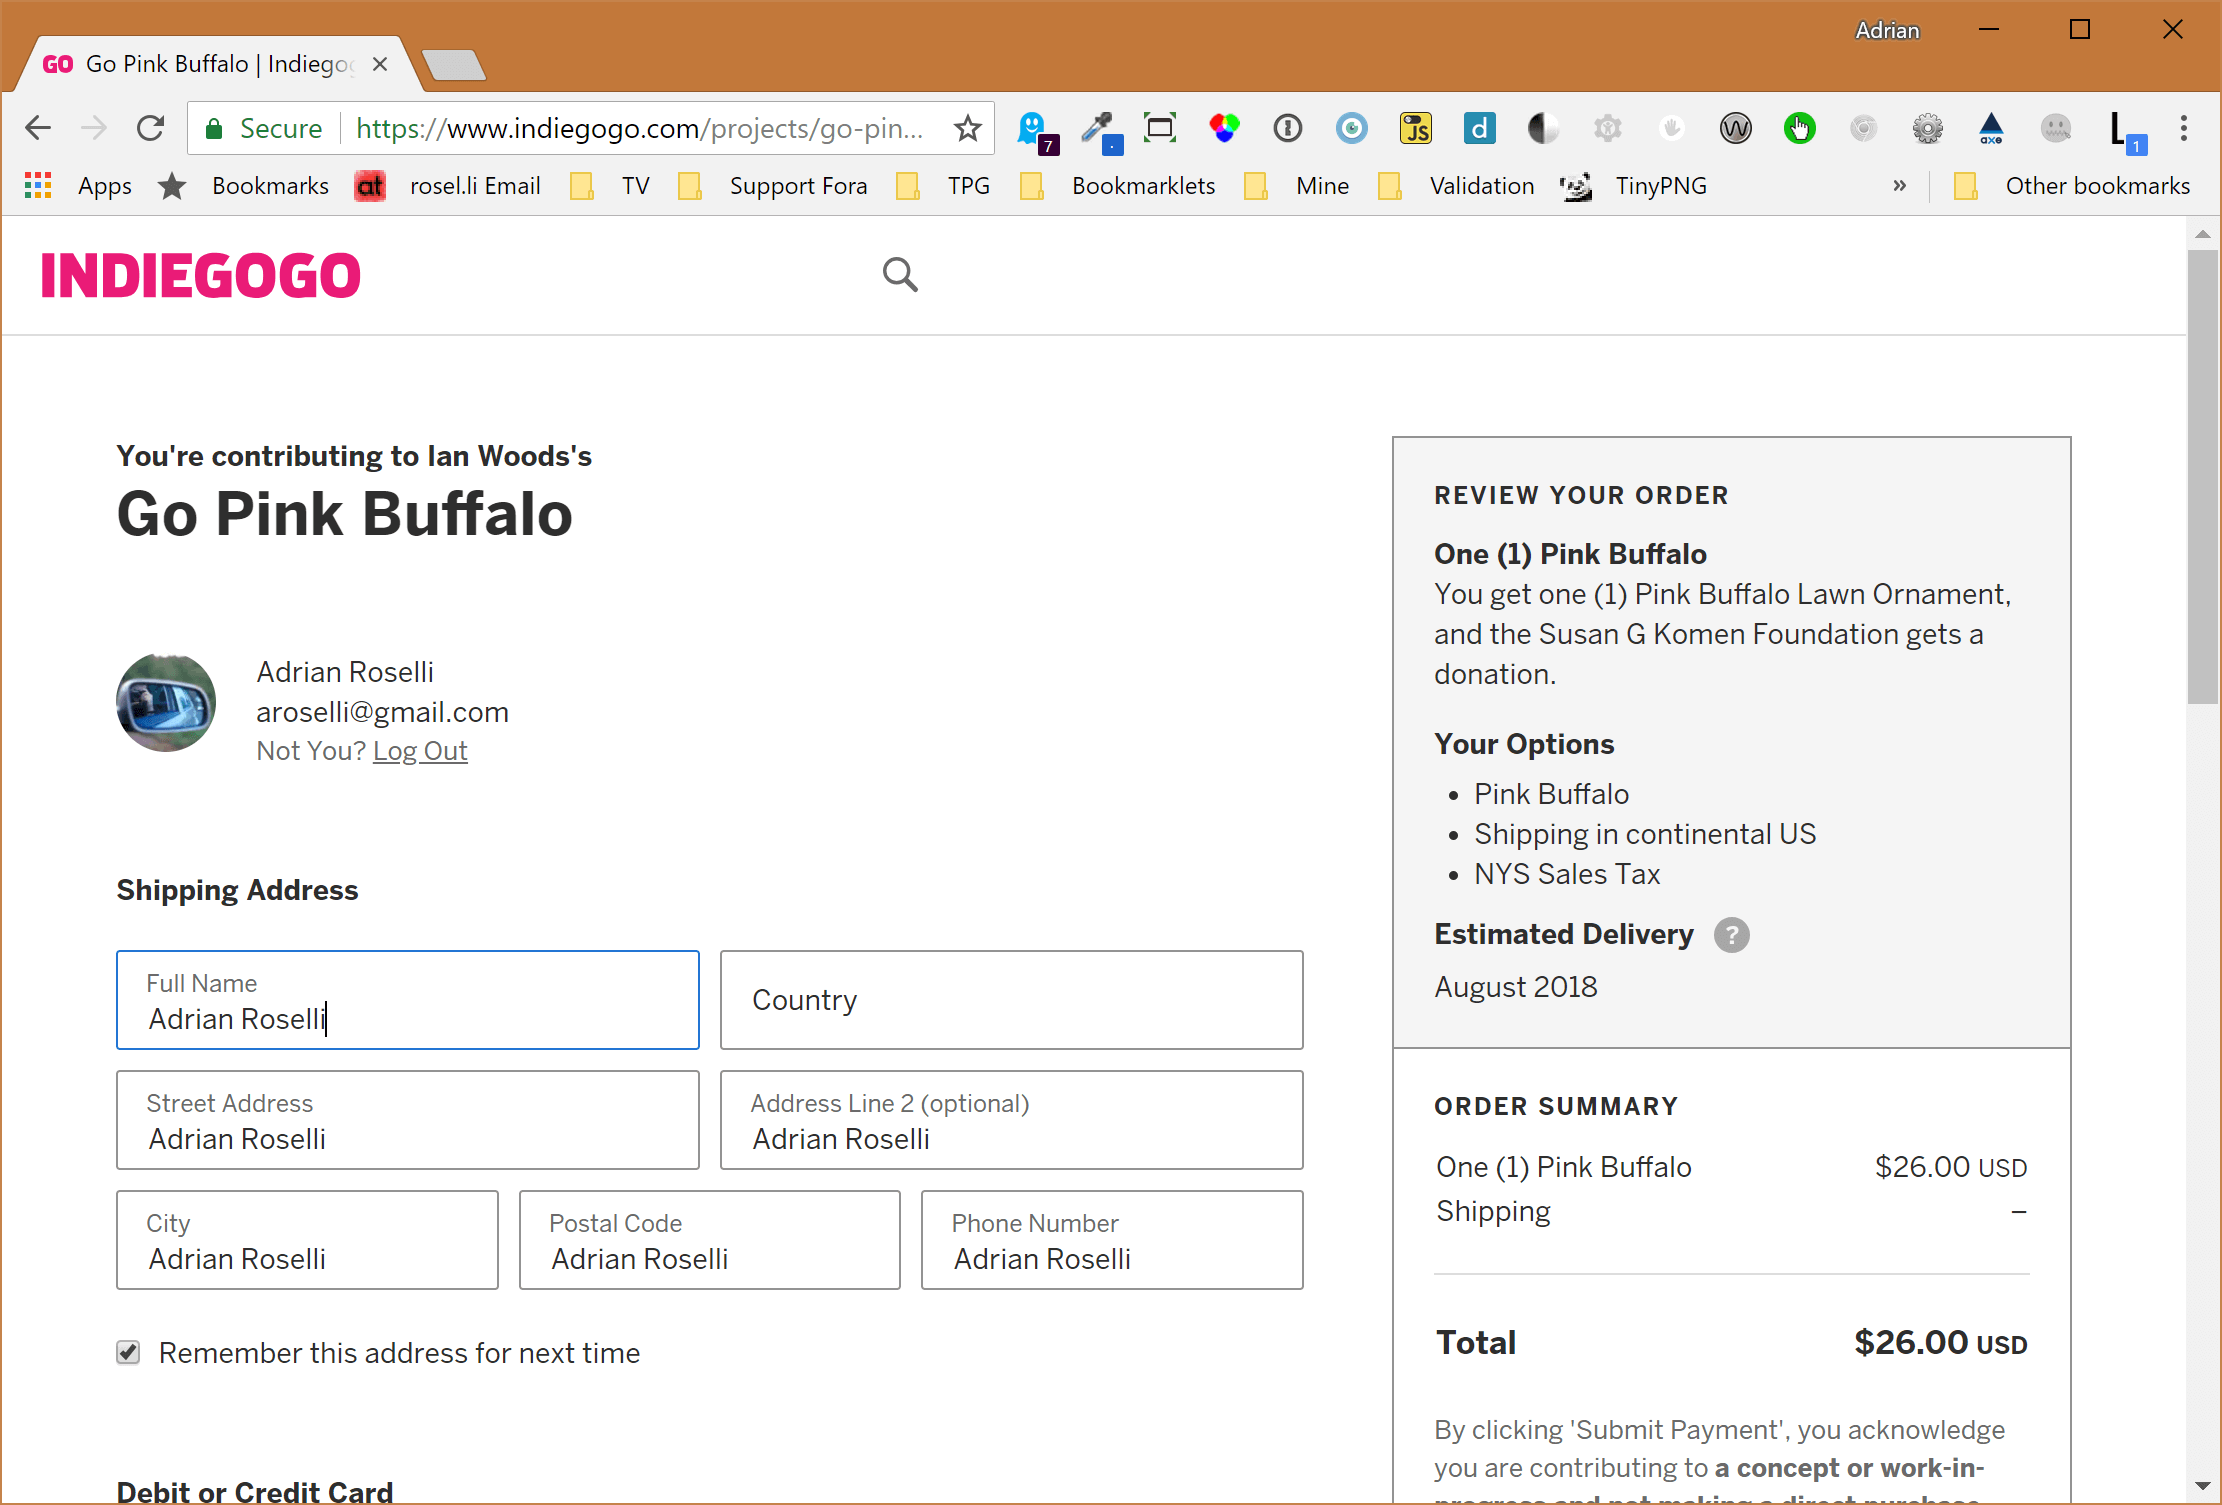 The same form, after I chose my name from the browser auto-complete options. Each separate field is filled out with my name, not my shipping address.